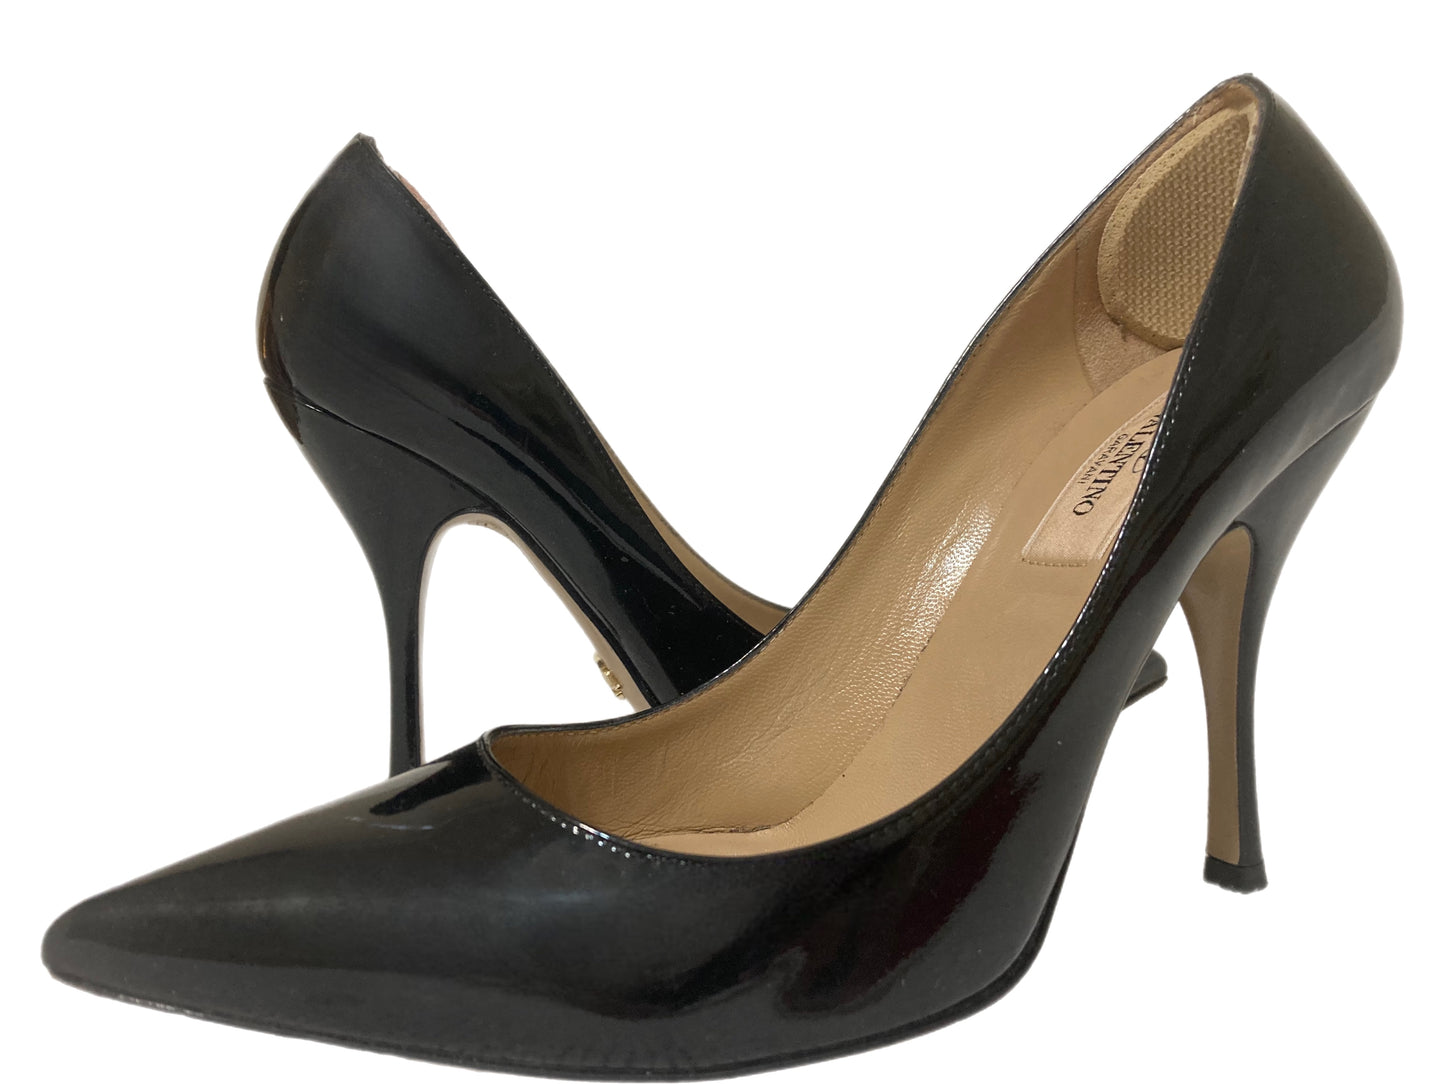 VALENTINO Patent Leather Pointed Toe Pumps Black Size 37